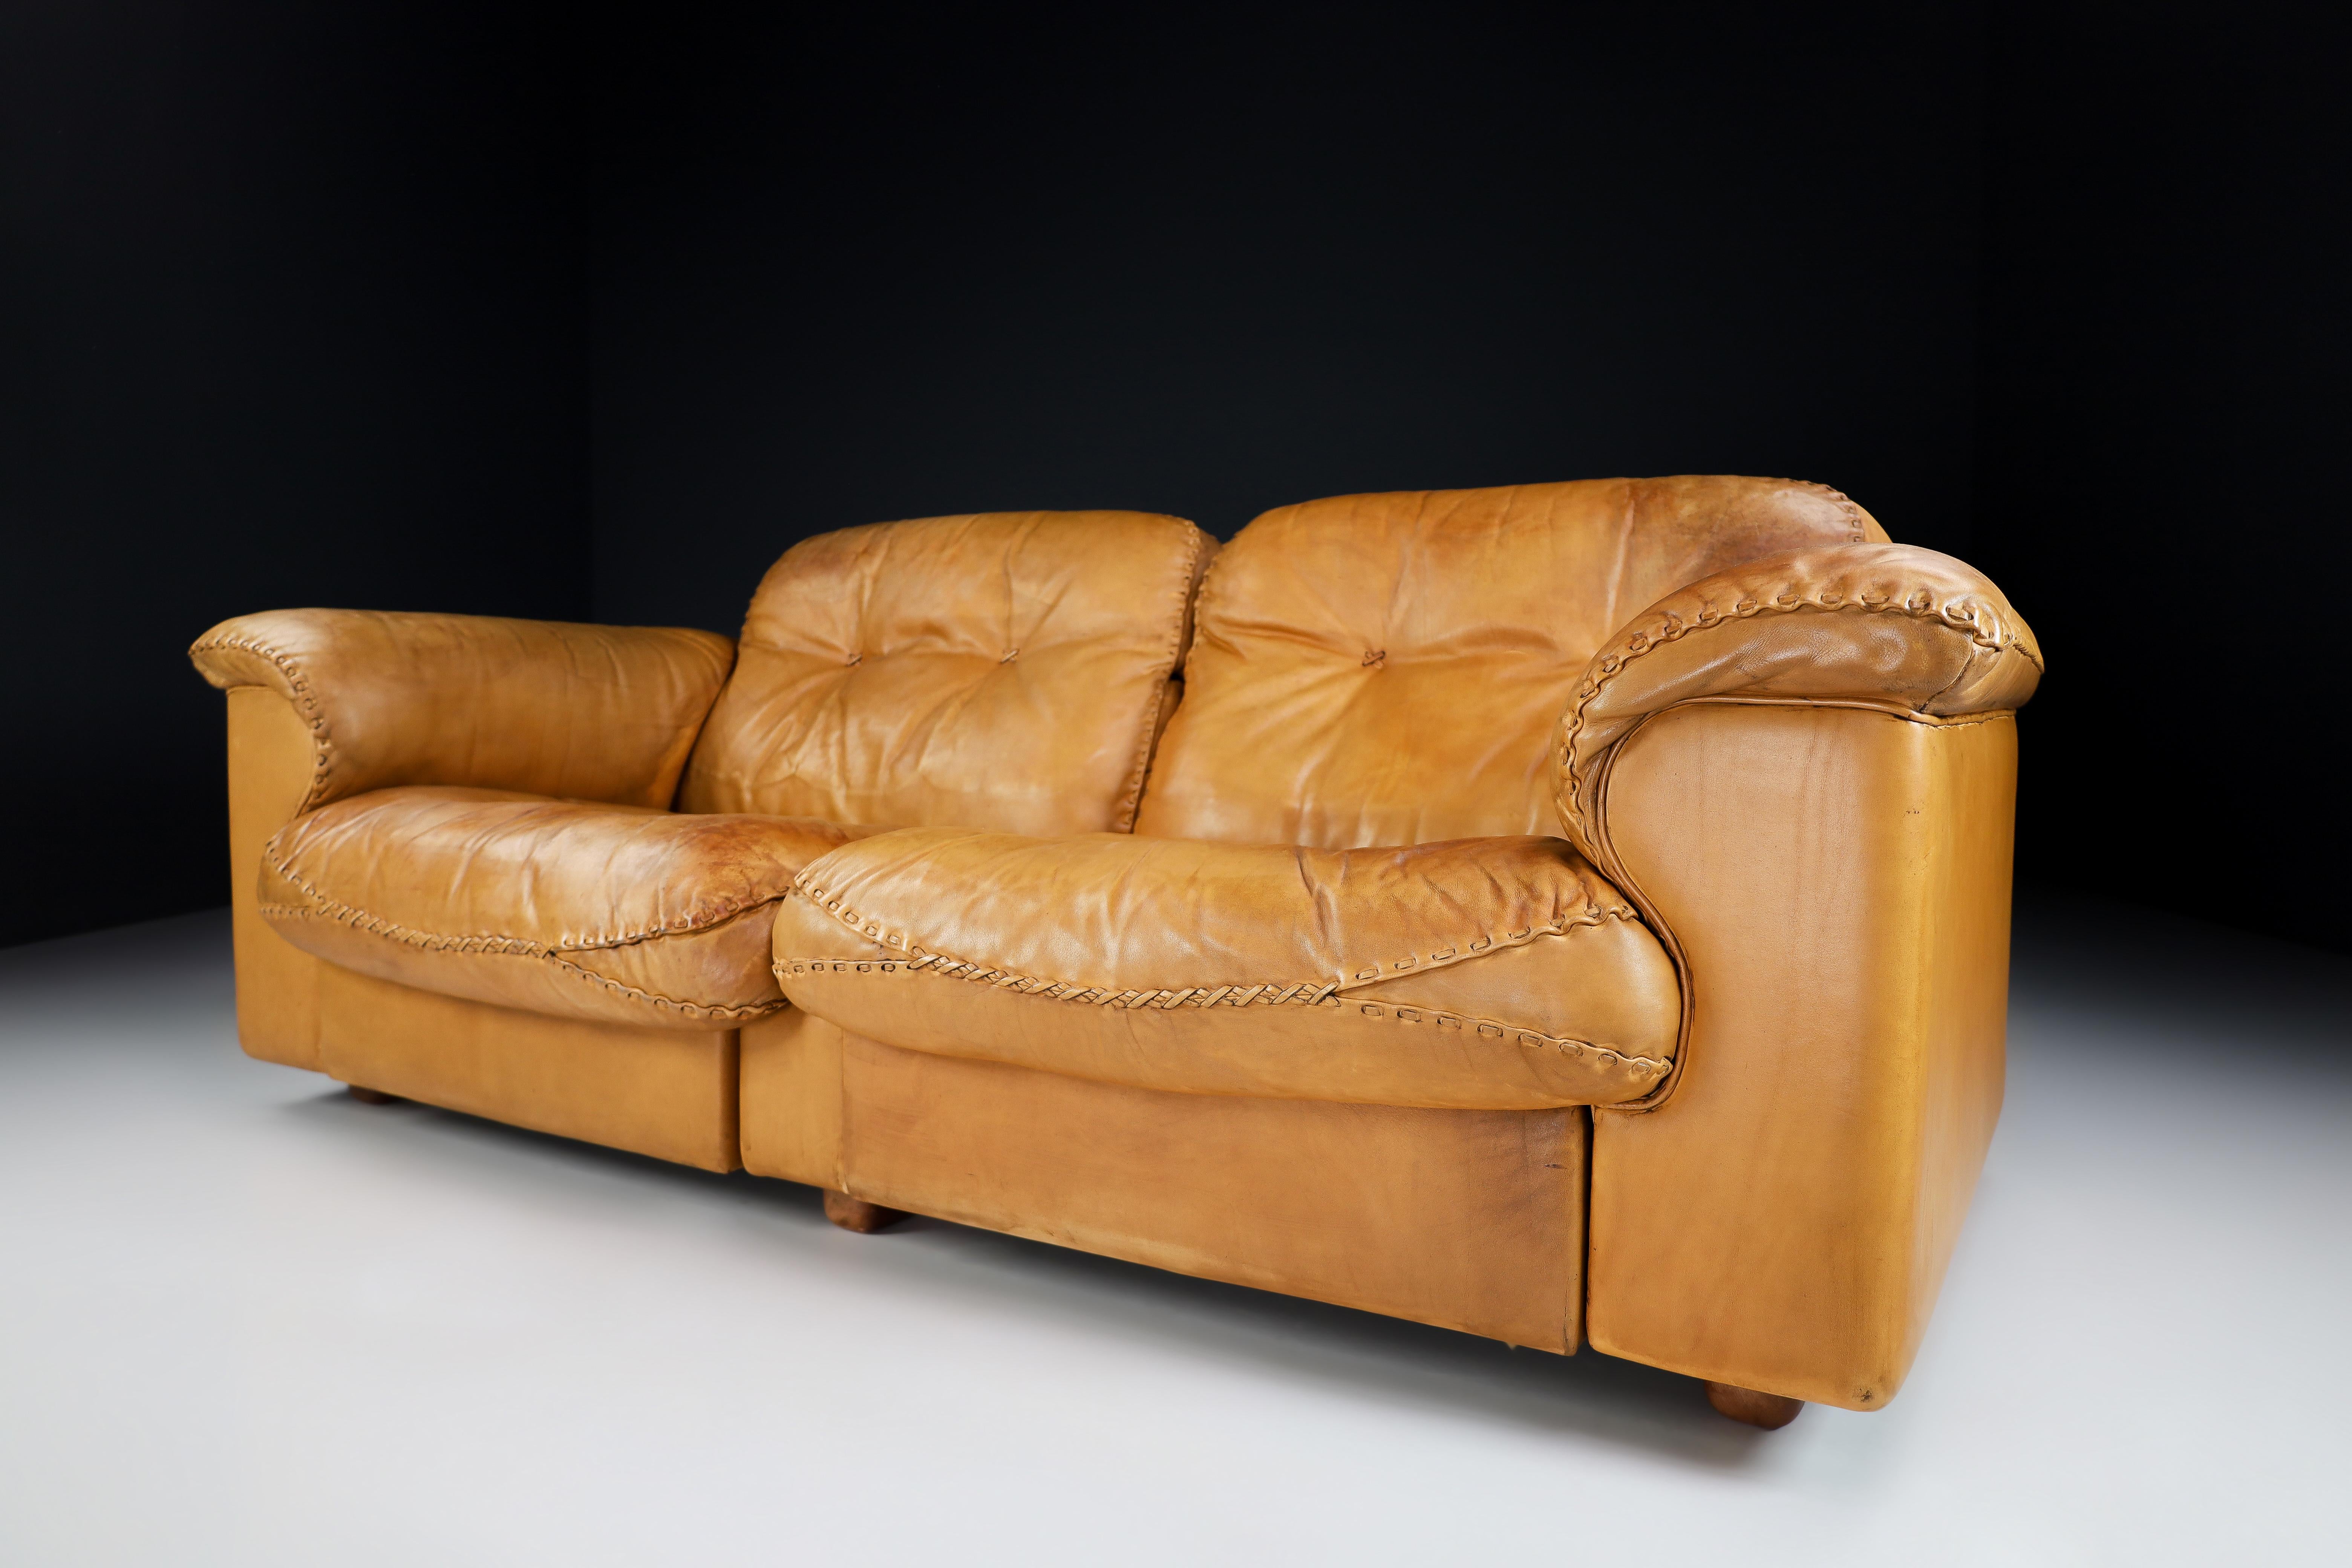 Swiss Robust Patinated Leather De Sede Ds-101 Two-Seater Sofa, Zwitserland 1960s